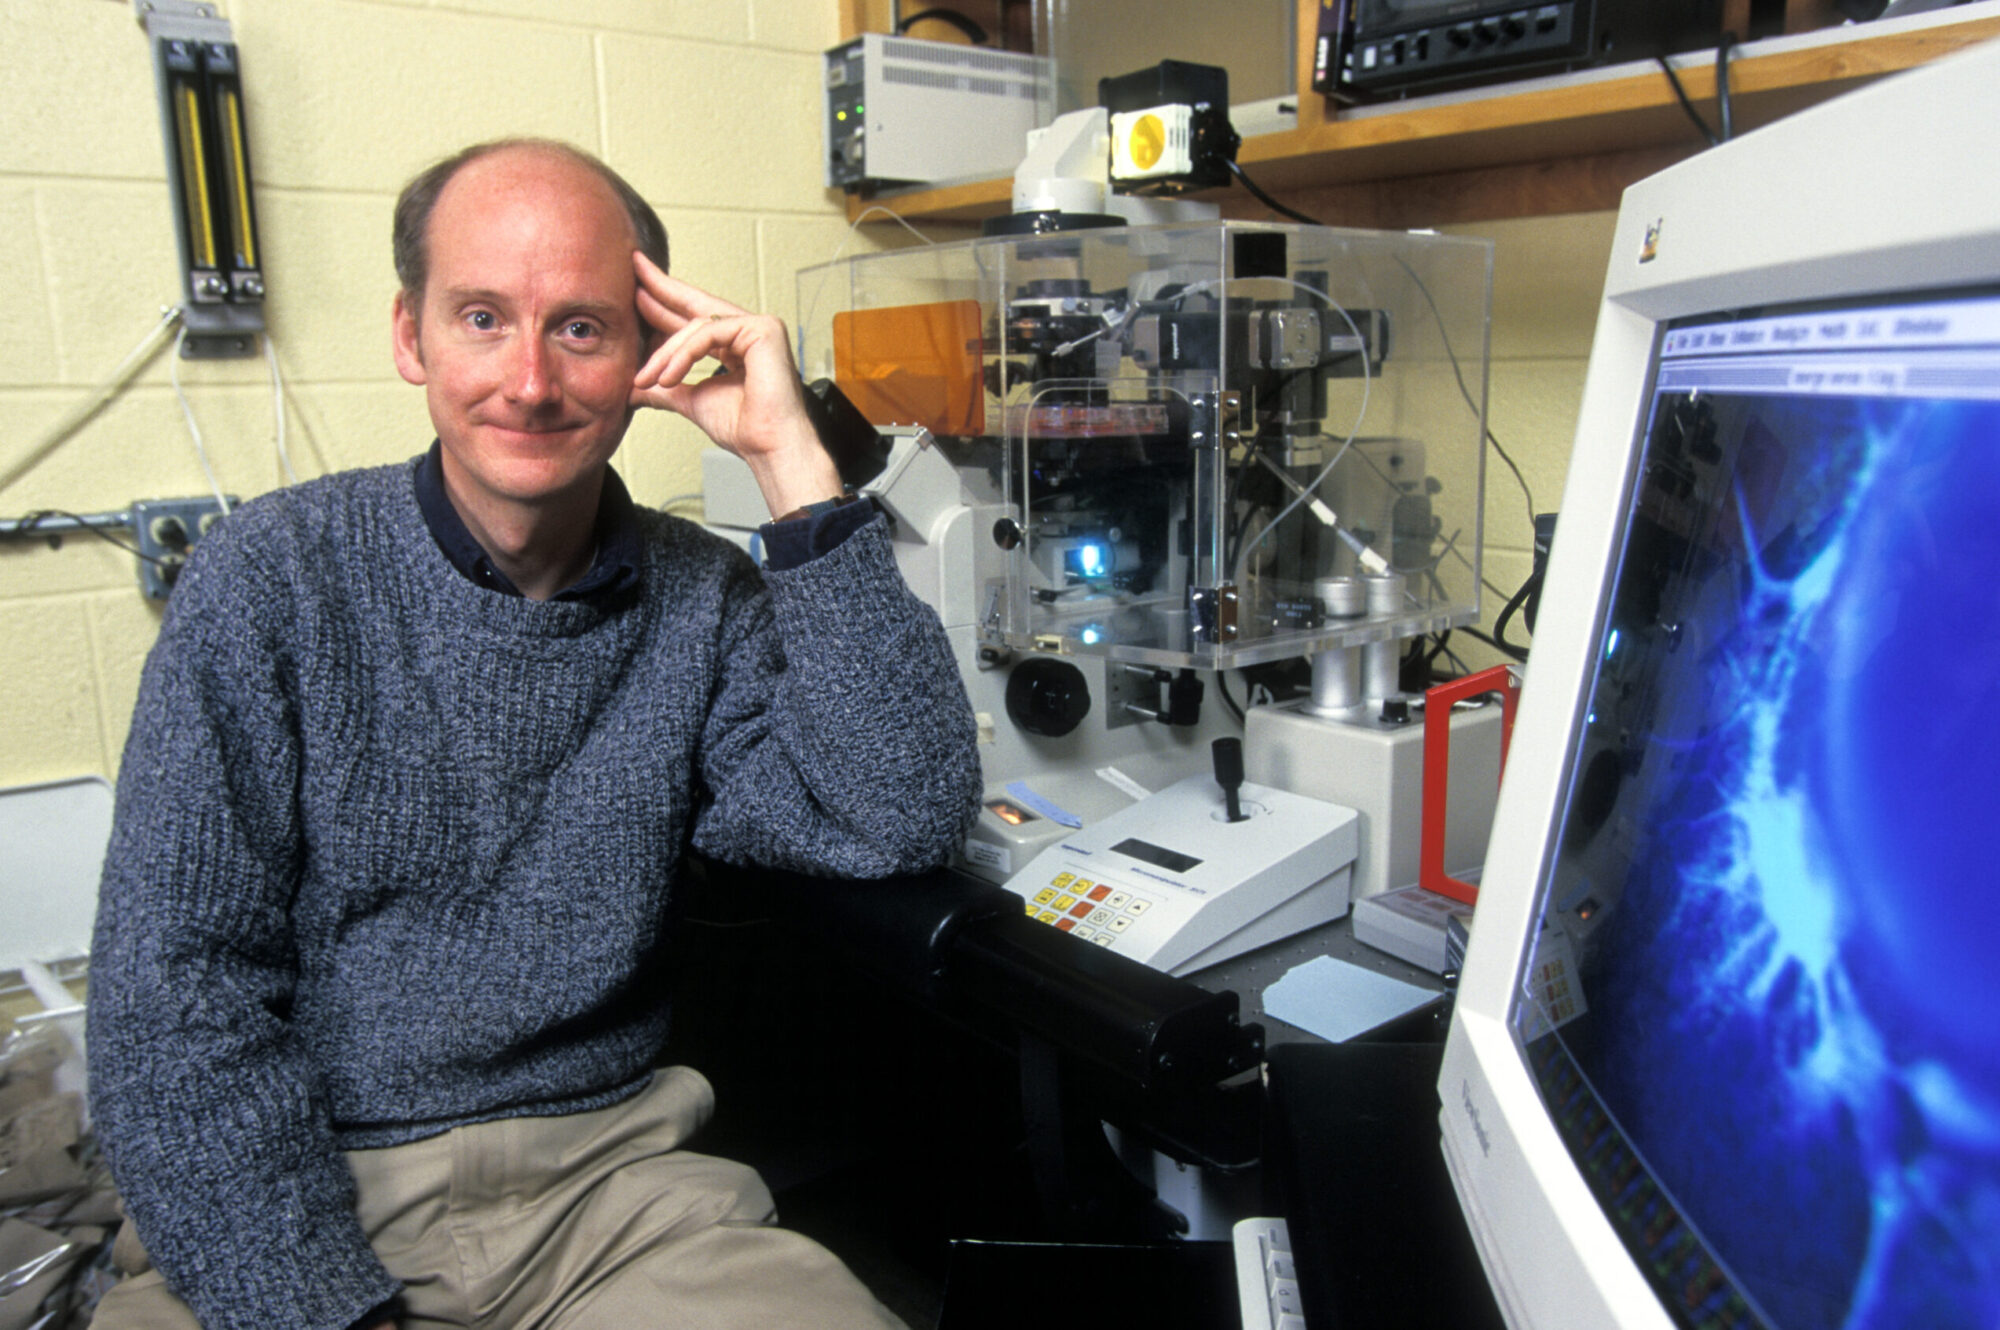 James Thomson posing beside lab equipment and computer displaying image of blue stem cell neurons in research laboratory.